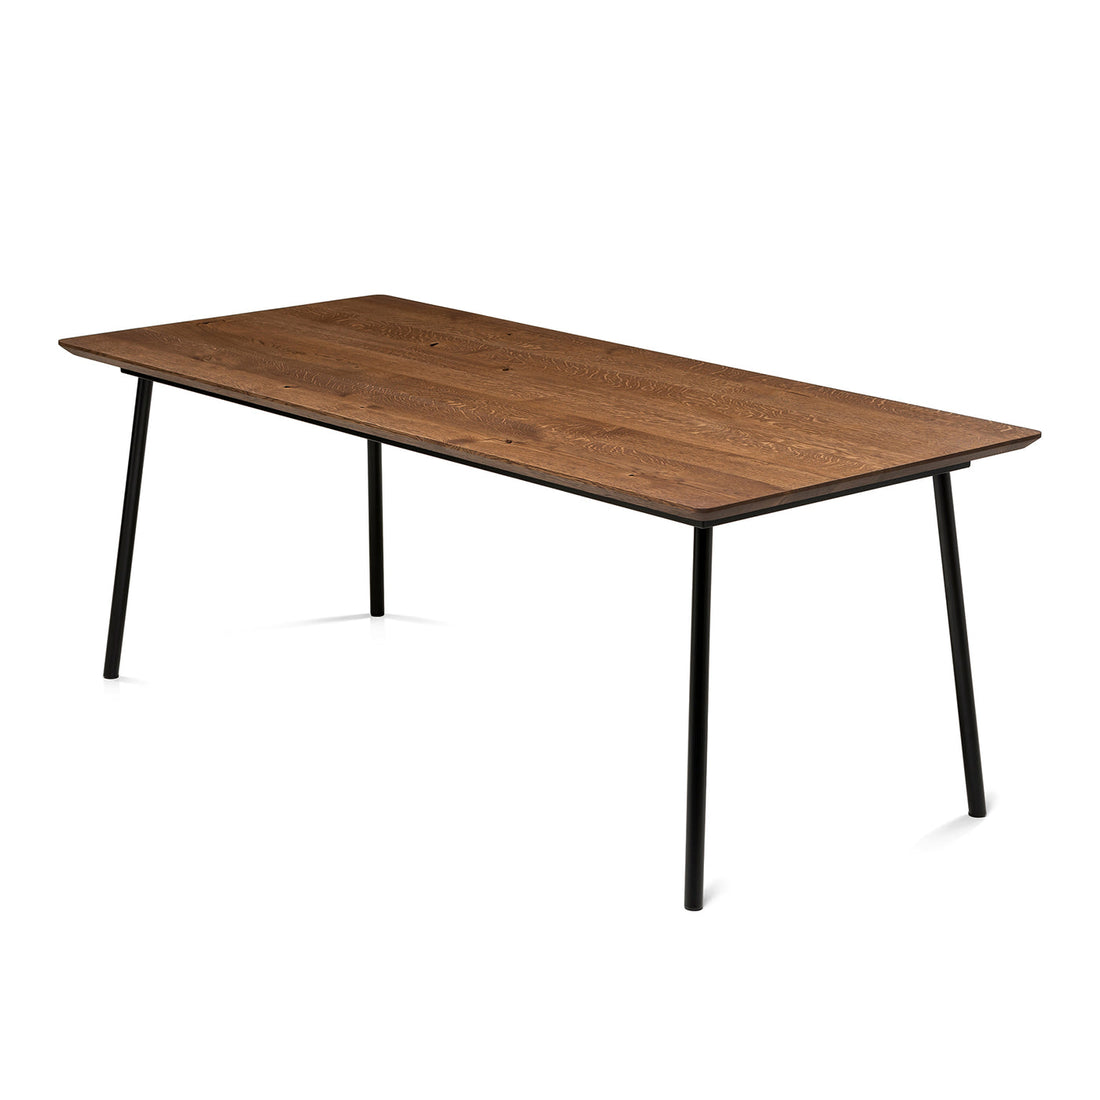 Aurora Extendable Oak Dining Table in Chocolate Oak by S10Home